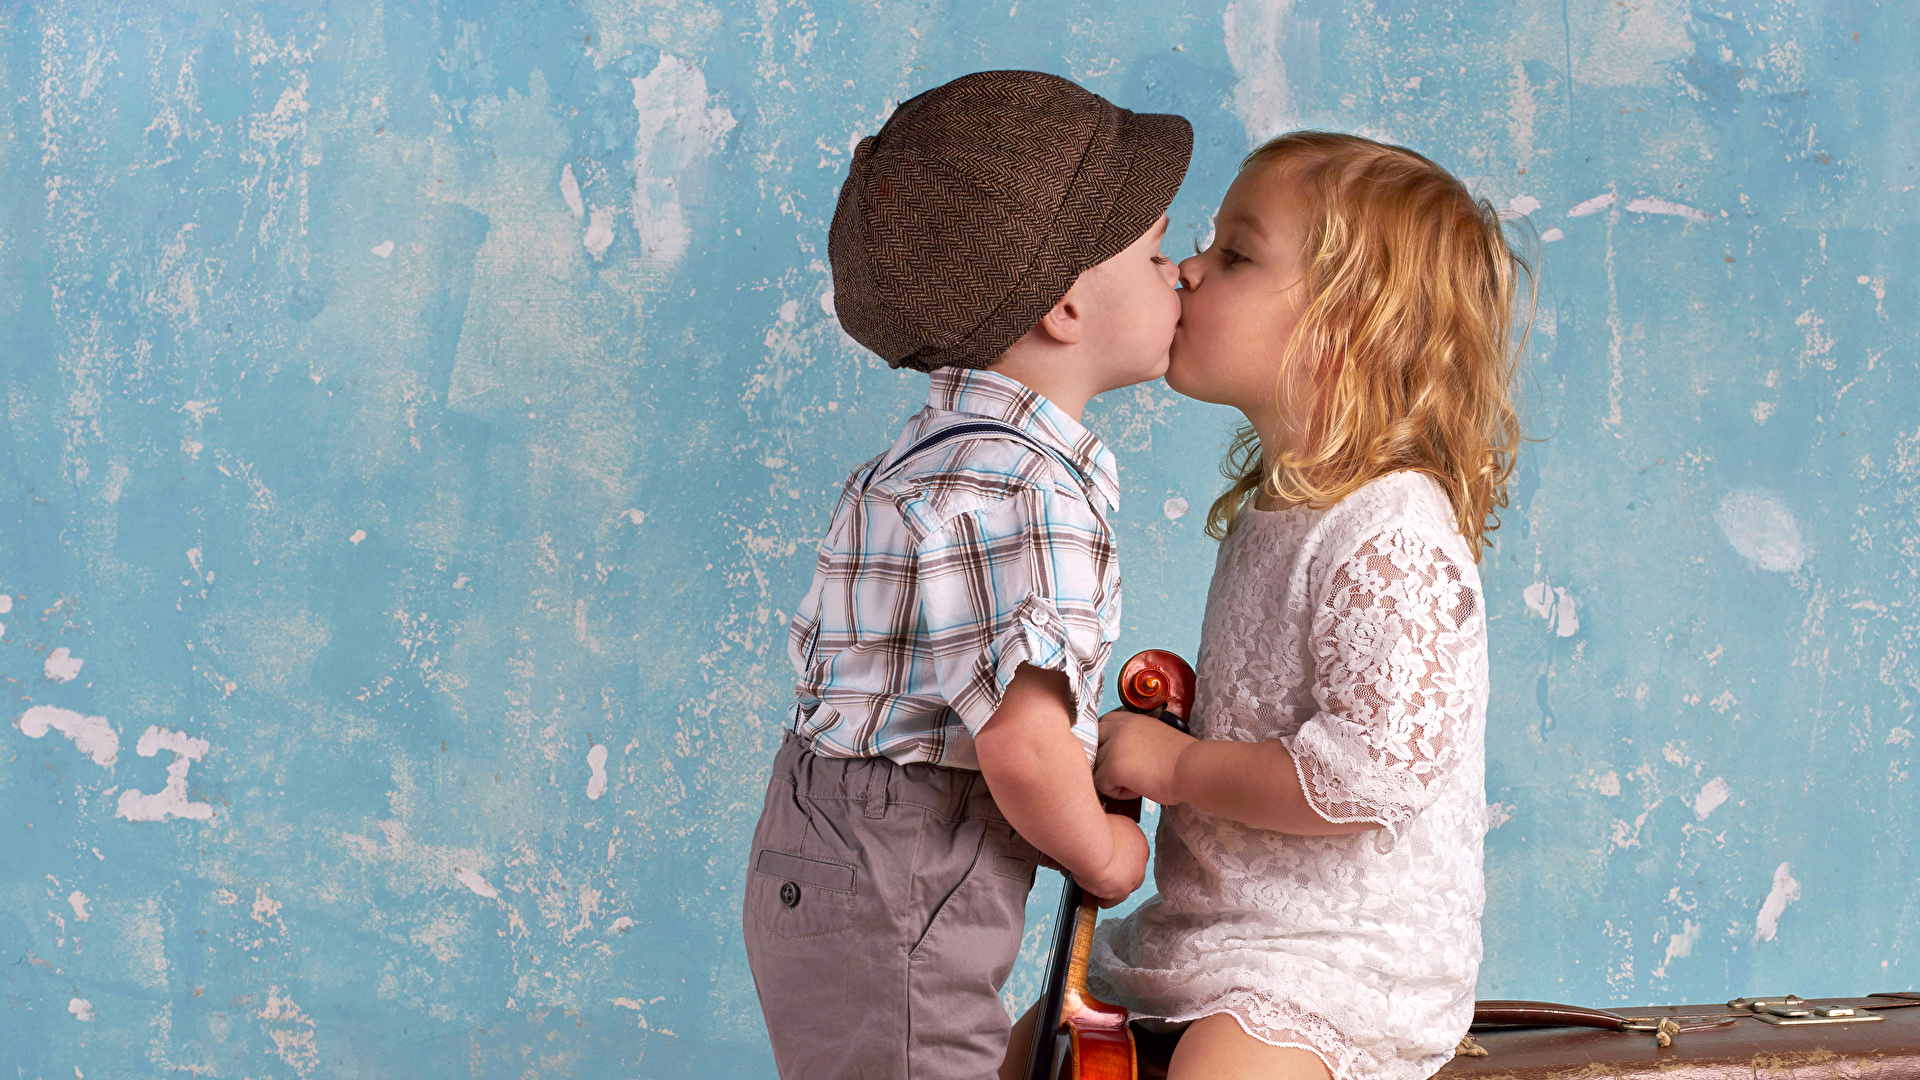 1920 X - Girl And Boy Kiss Image Download , HD Wallpaper & Backgrounds